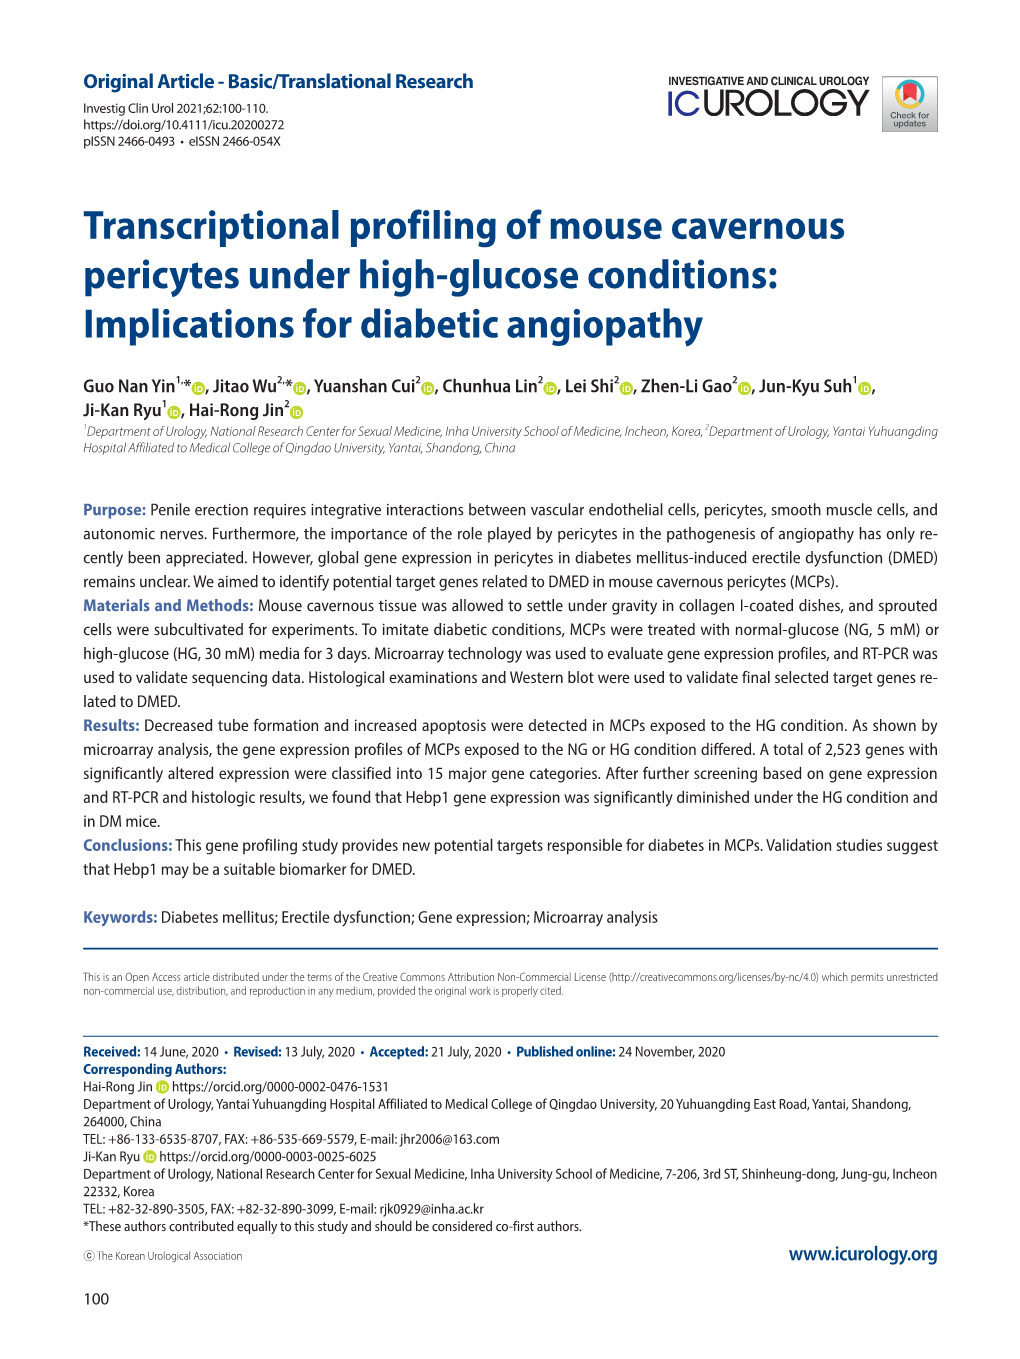 Transcriptional Profiling of Mouse Cavernous Pericytes Under High-Glucose Conditions: Implications for Diabetic Angiopathy